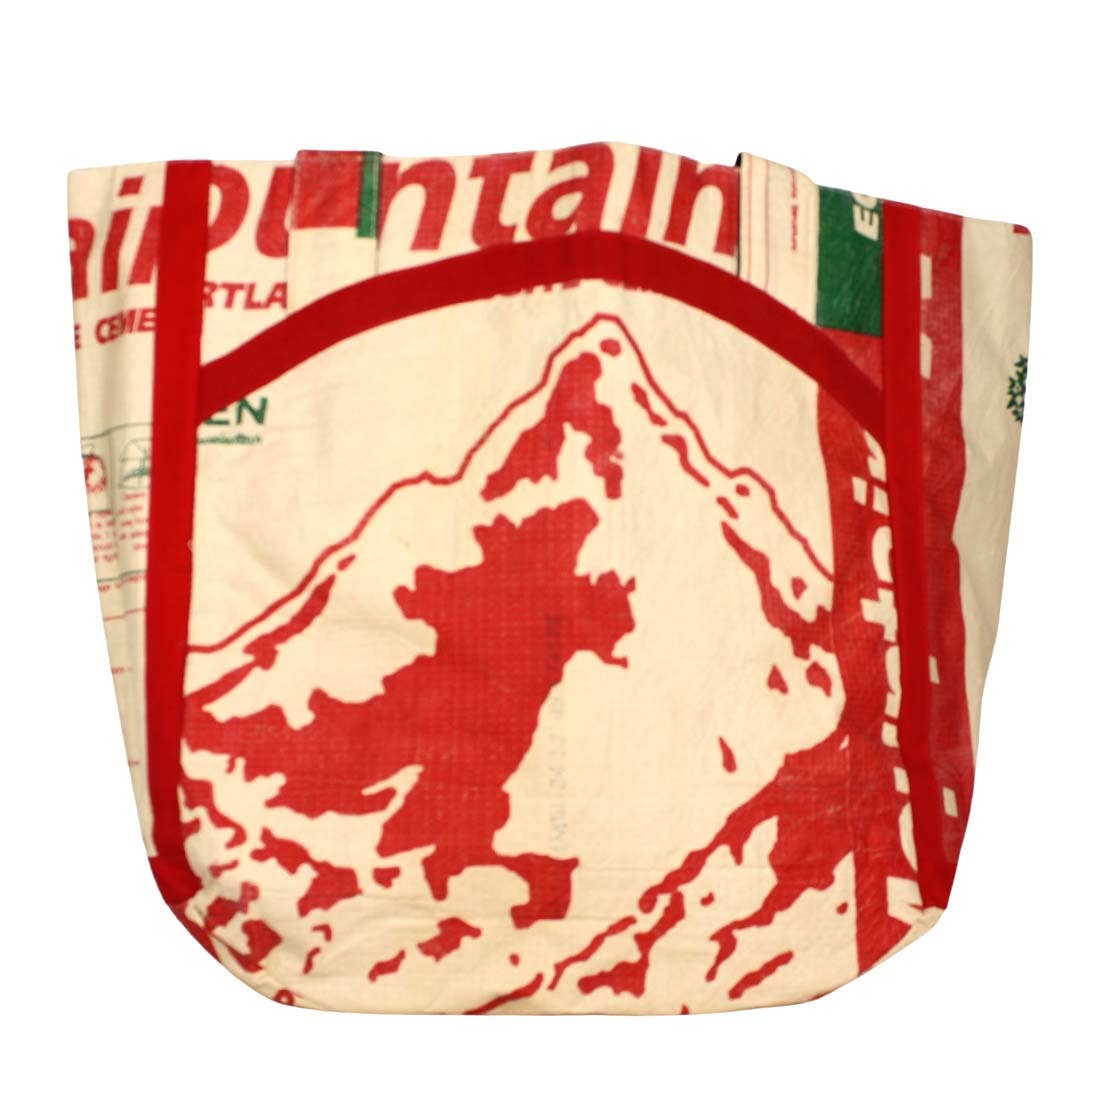 
  
  Mountain Cement Recycled Book Bag
  
